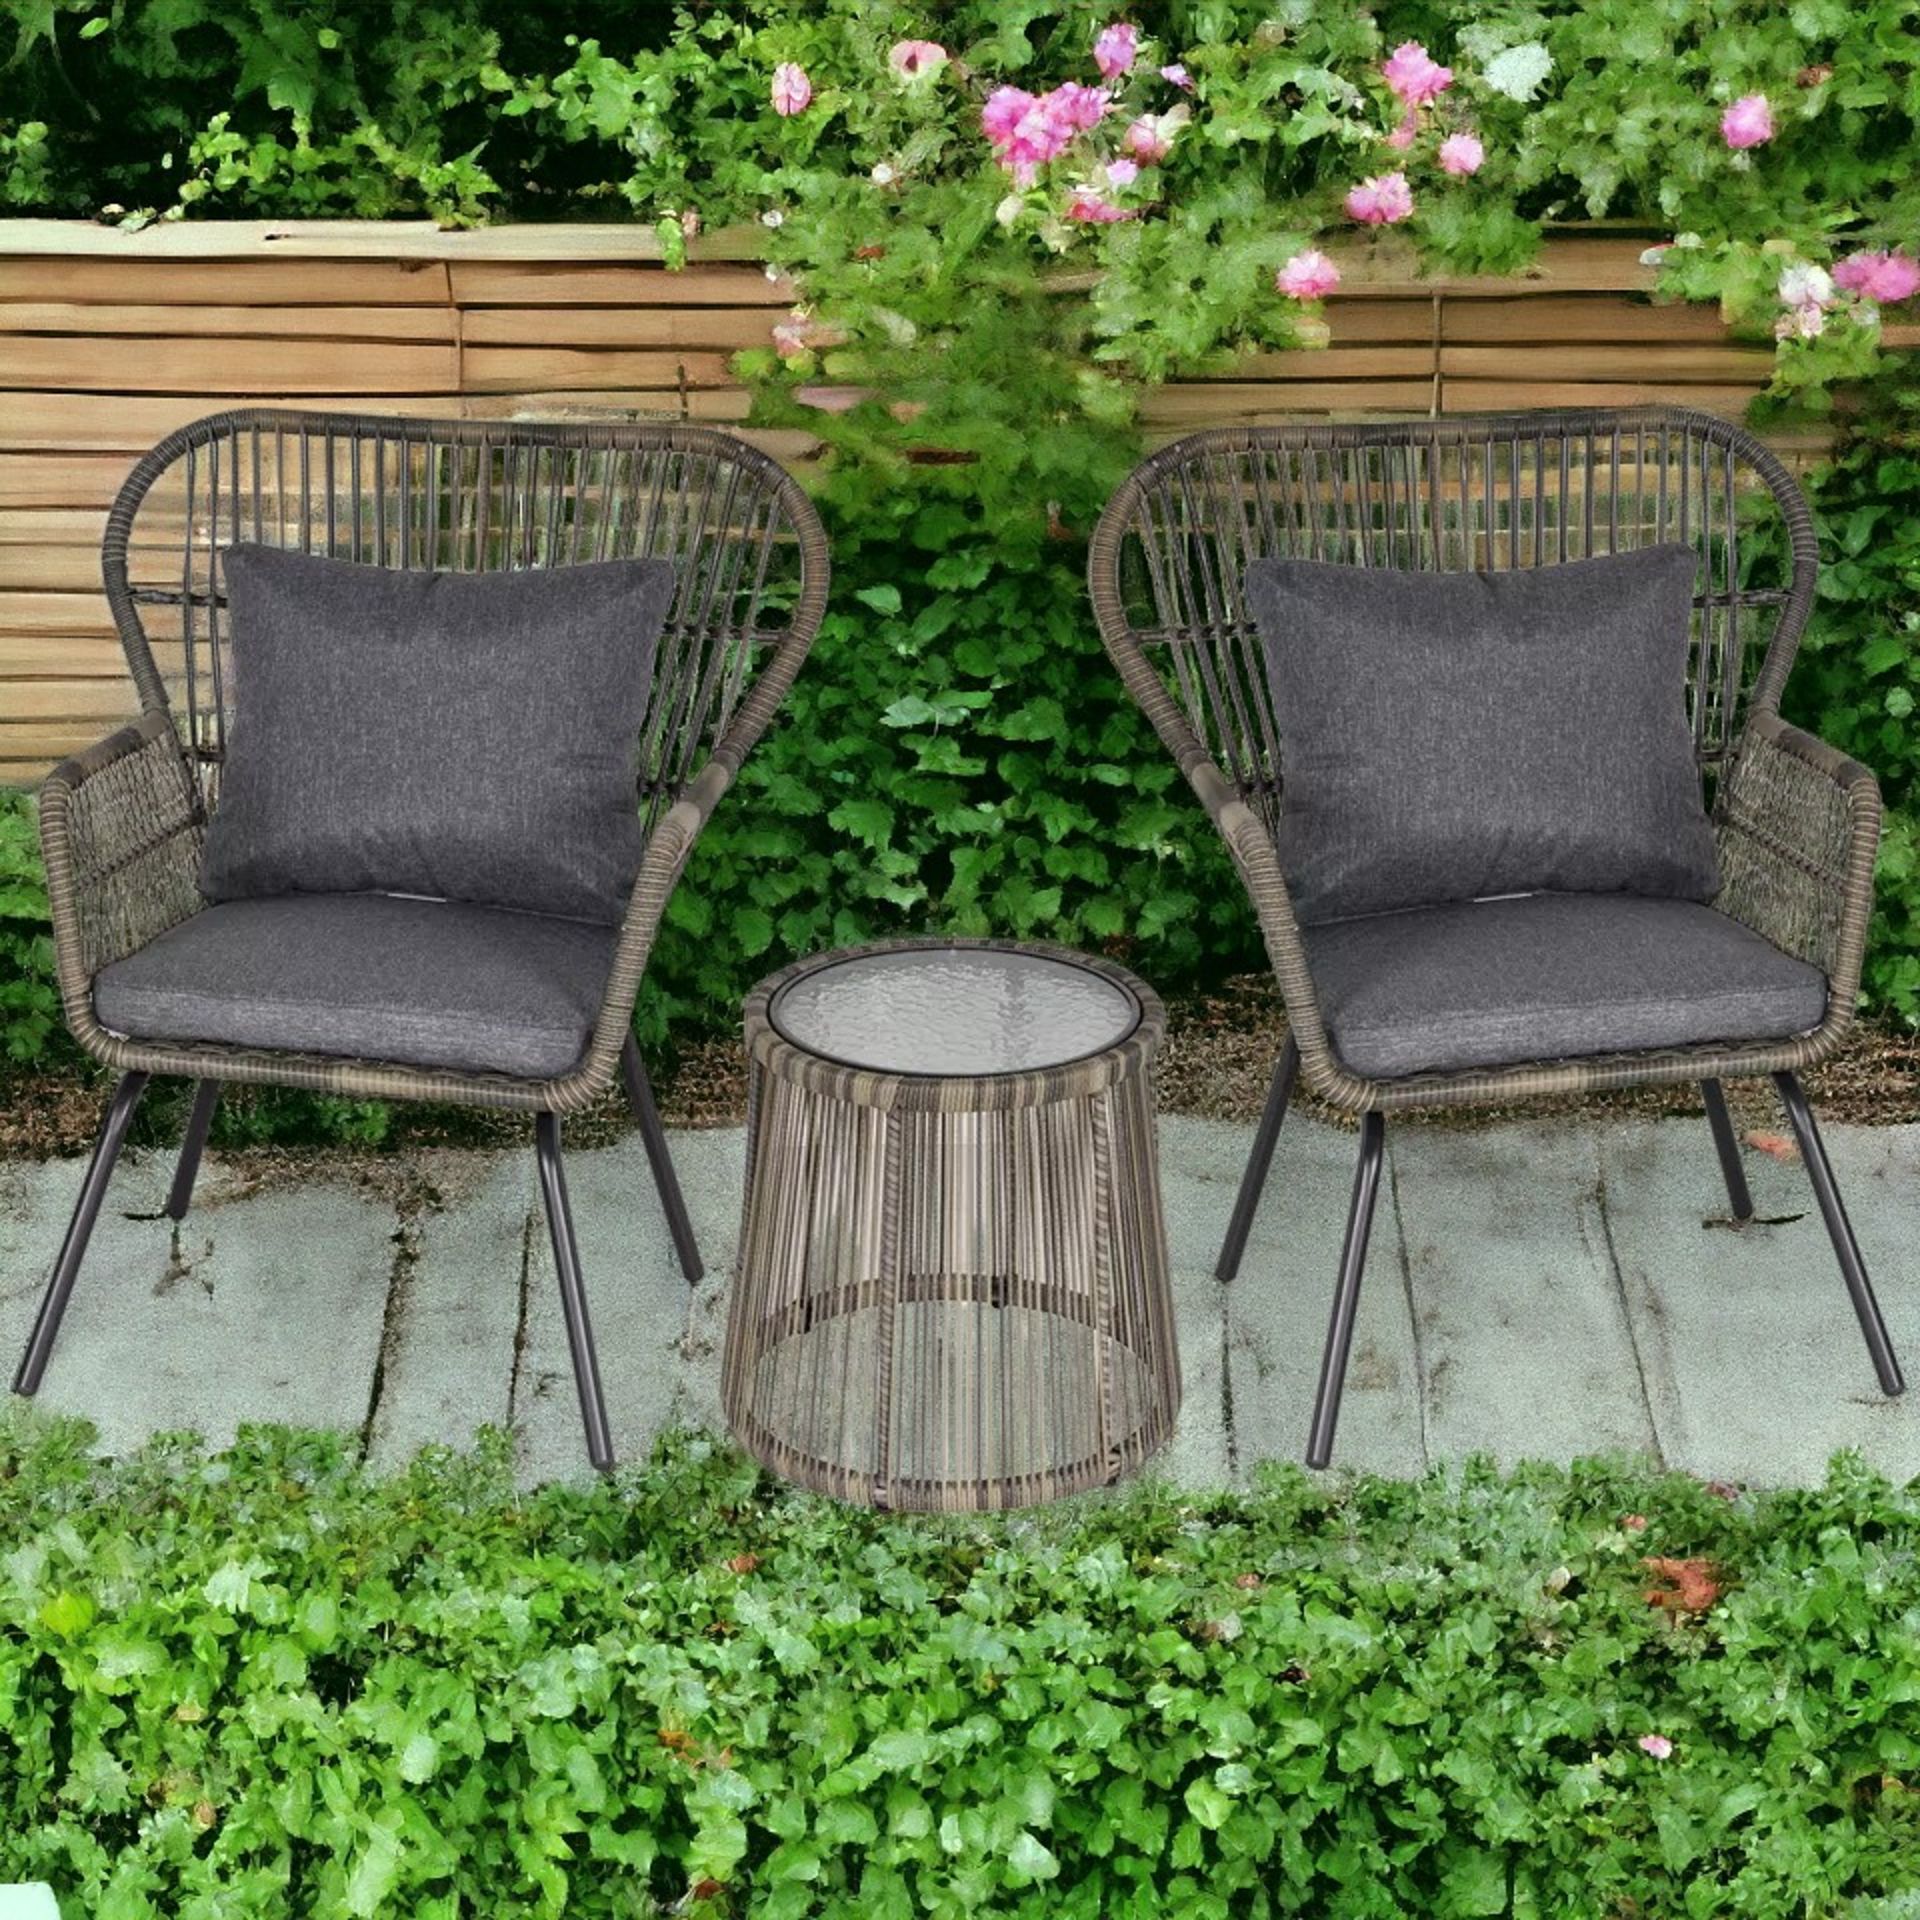 FREE DELIVERY -BRAND NEW 3 PCS WEBBED PE RATTAN OUTDOOR PATIO SET W/ CUSHIONS STEEL FRAME GREY - Image 2 of 2